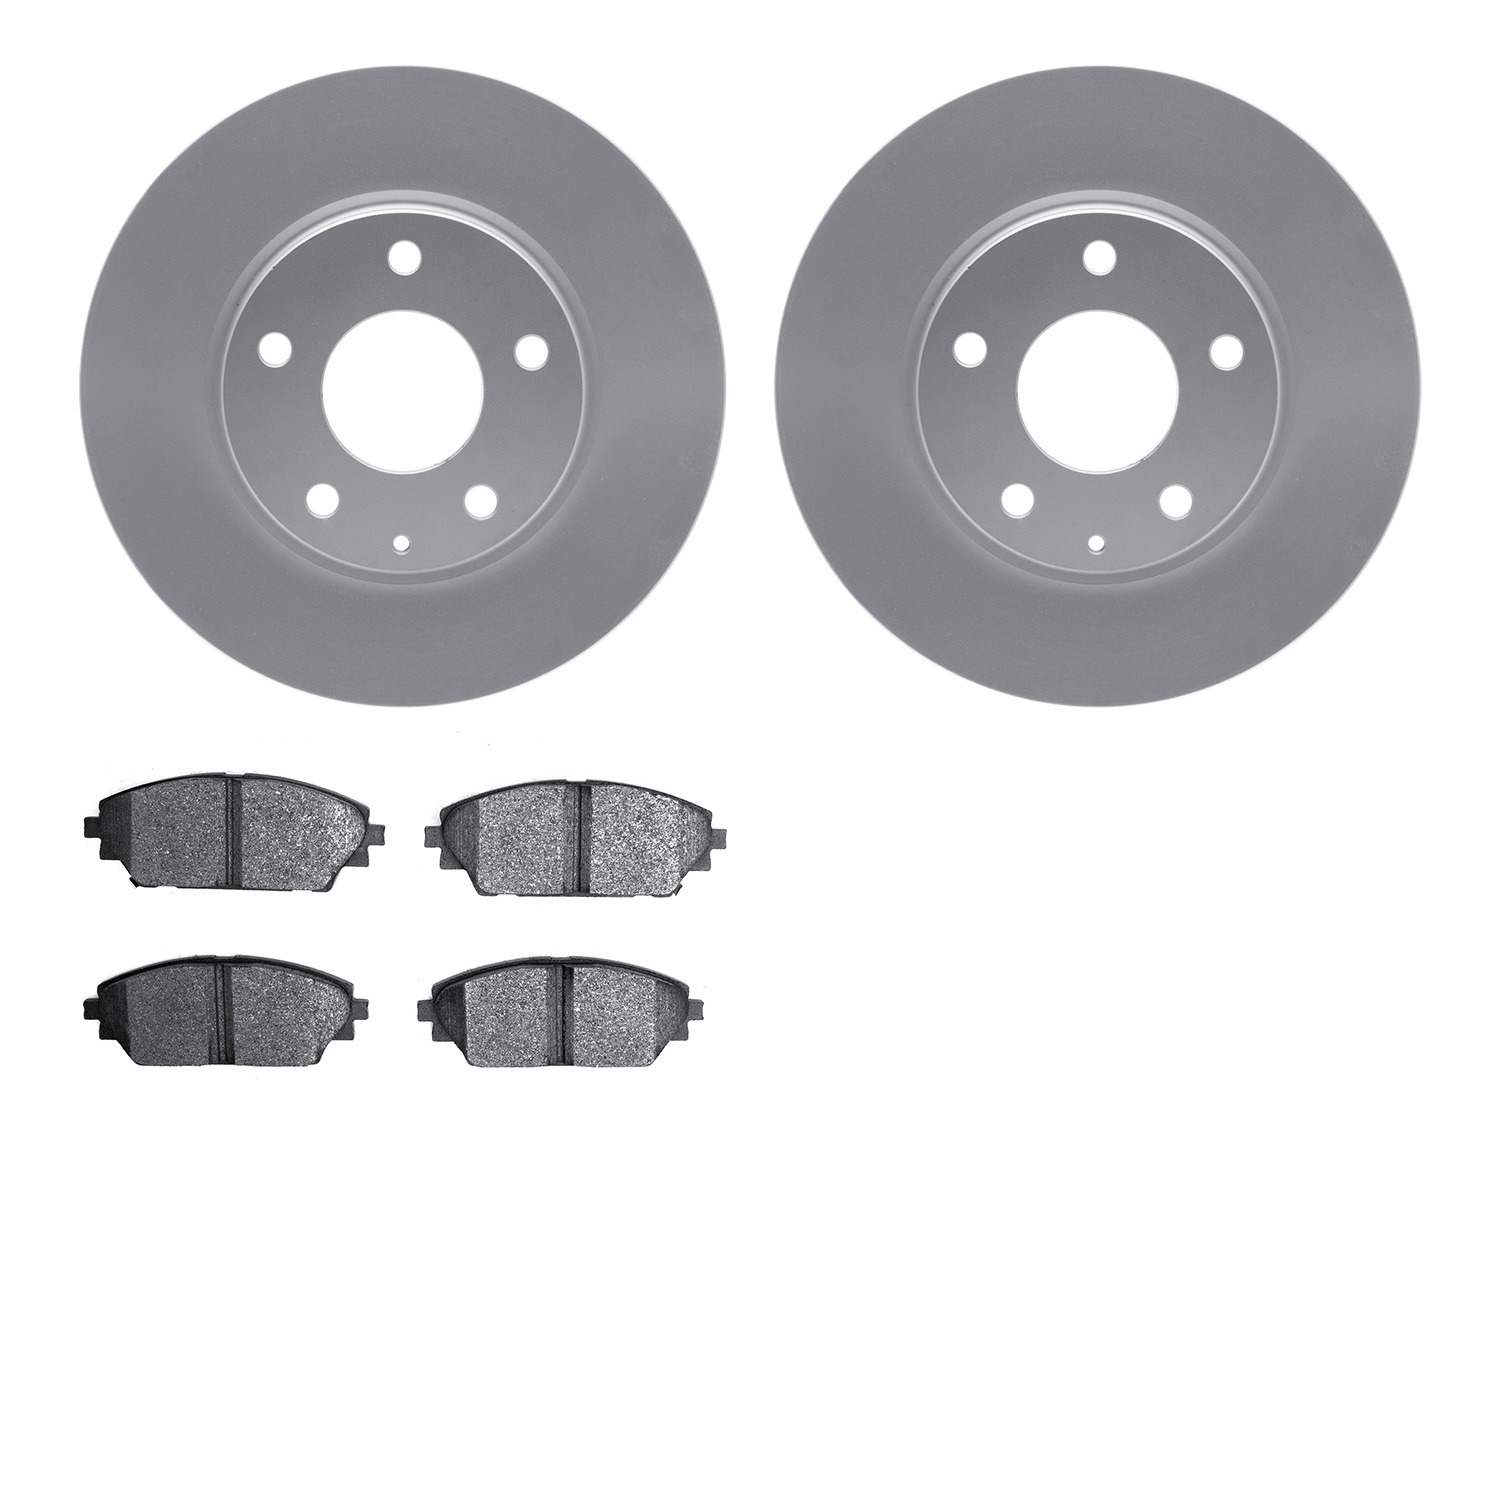 4302-80040 Geospec Brake Rotors with 3000-Series Ceramic Brake Pads Kit, Fits Select Ford/Lincoln/Mercury/Mazda, Position: Front